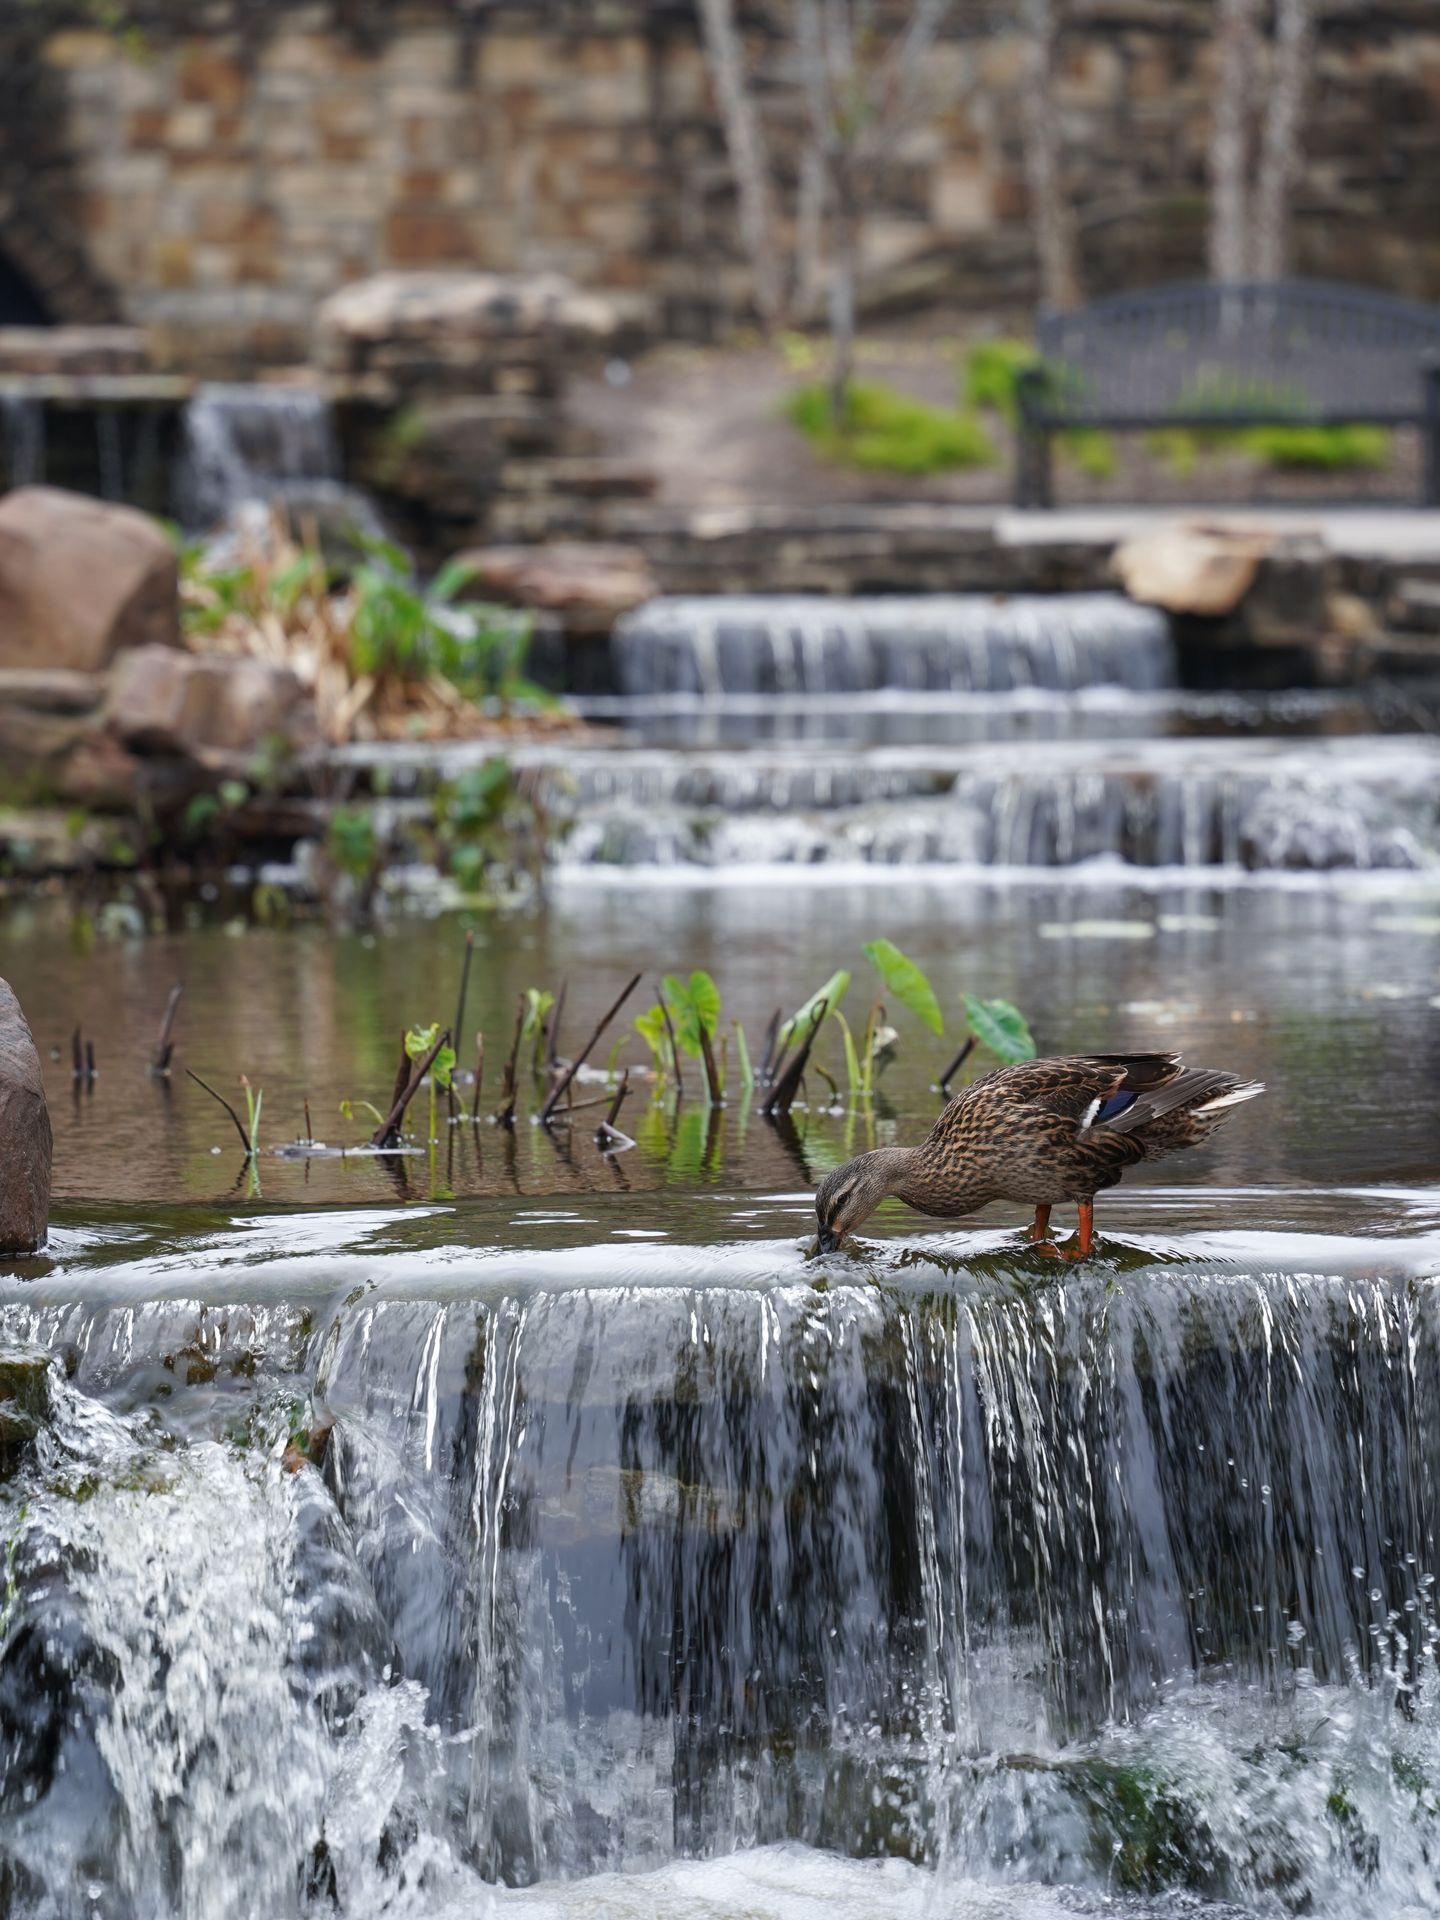 A duck drinking water in a water feature right off of The Woodlands Waterway